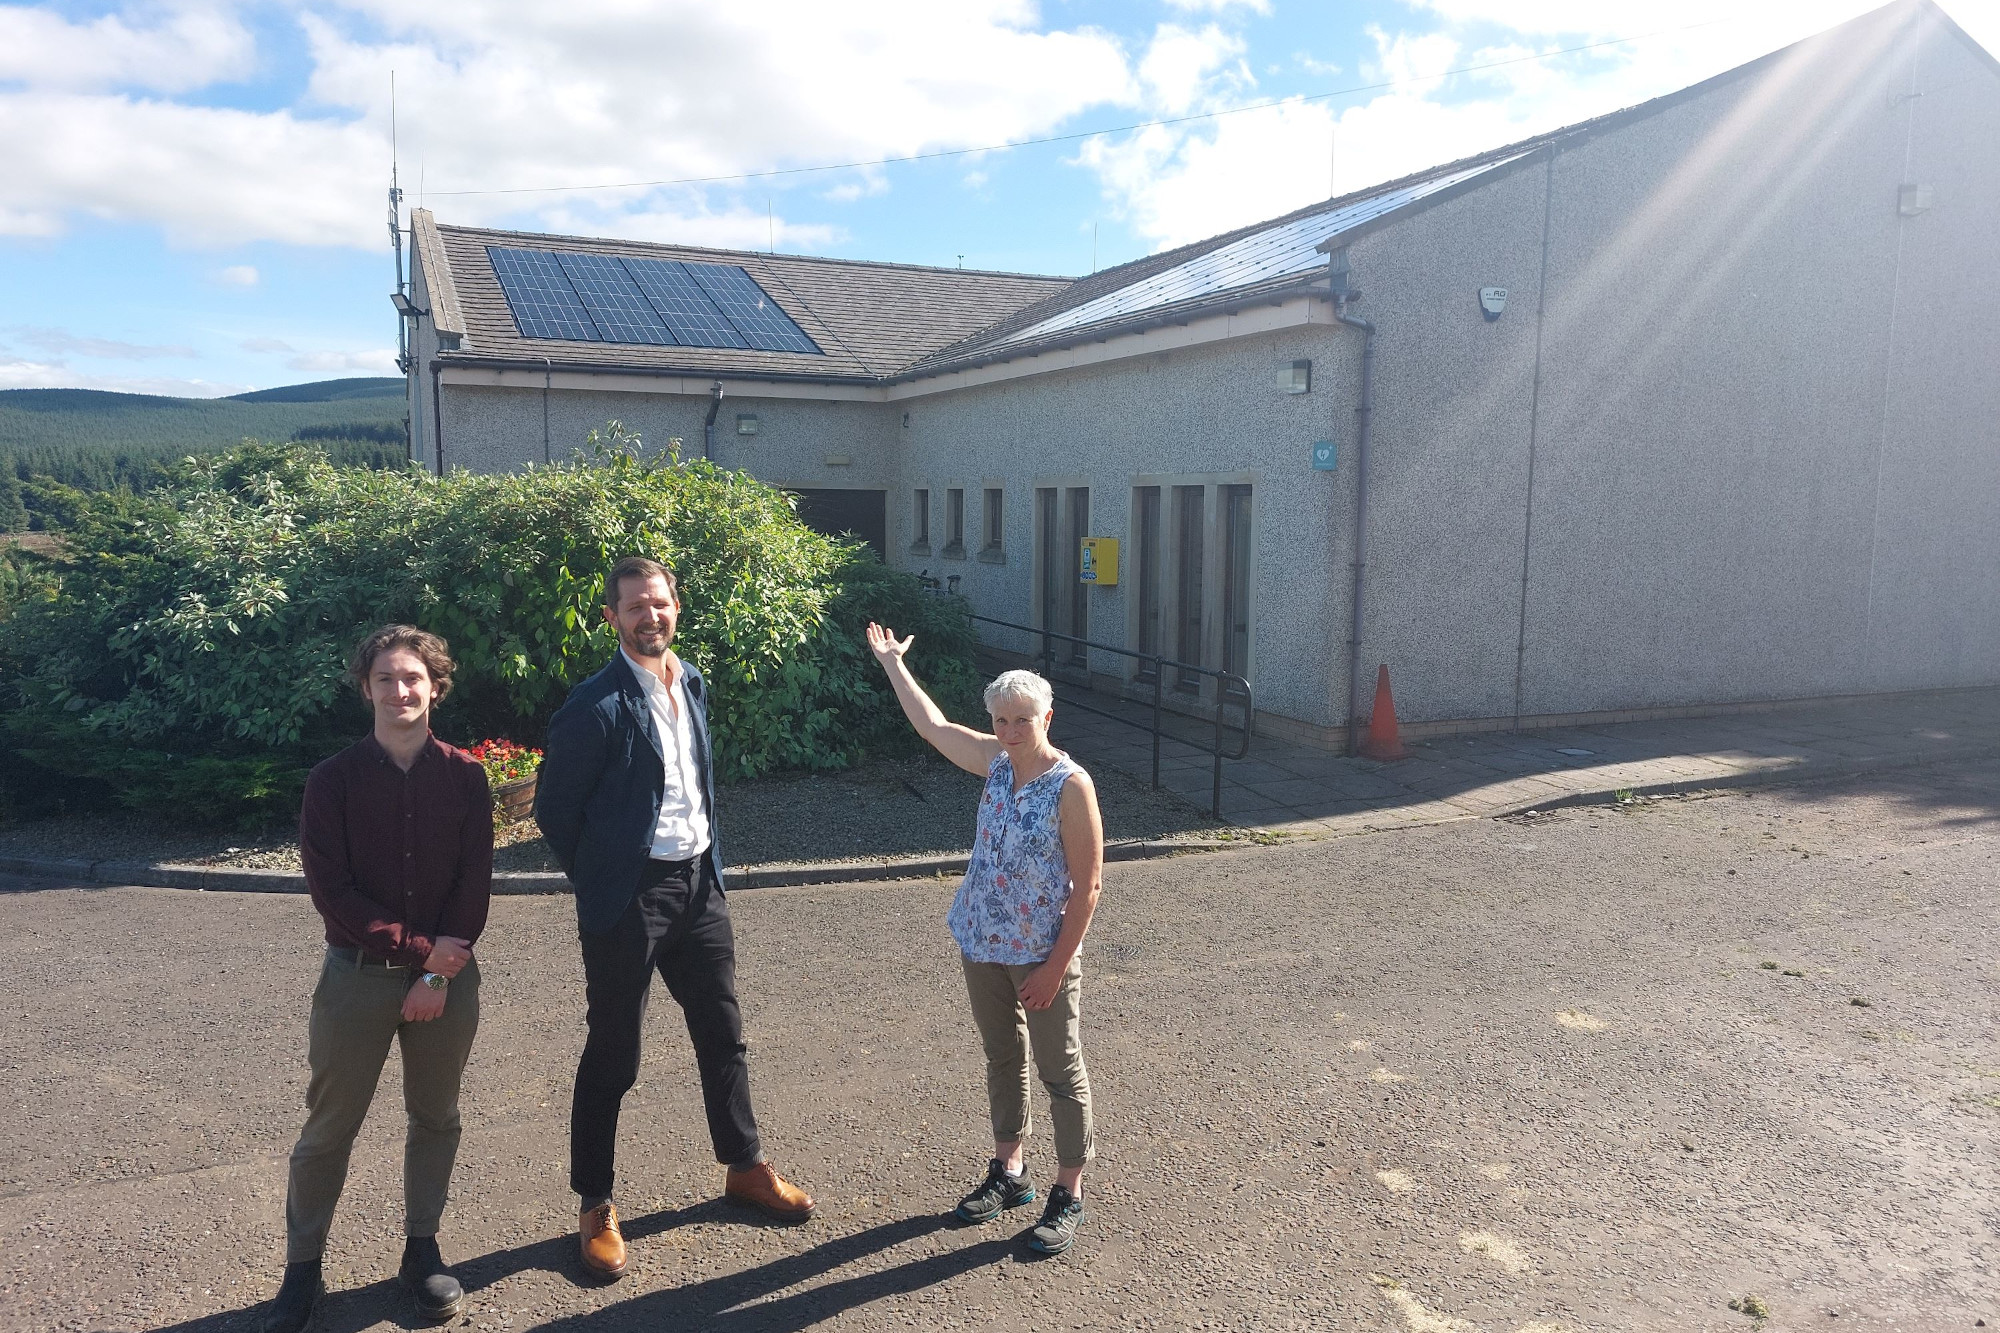 South Lanarkshire village hall aiming to become UK's greenest